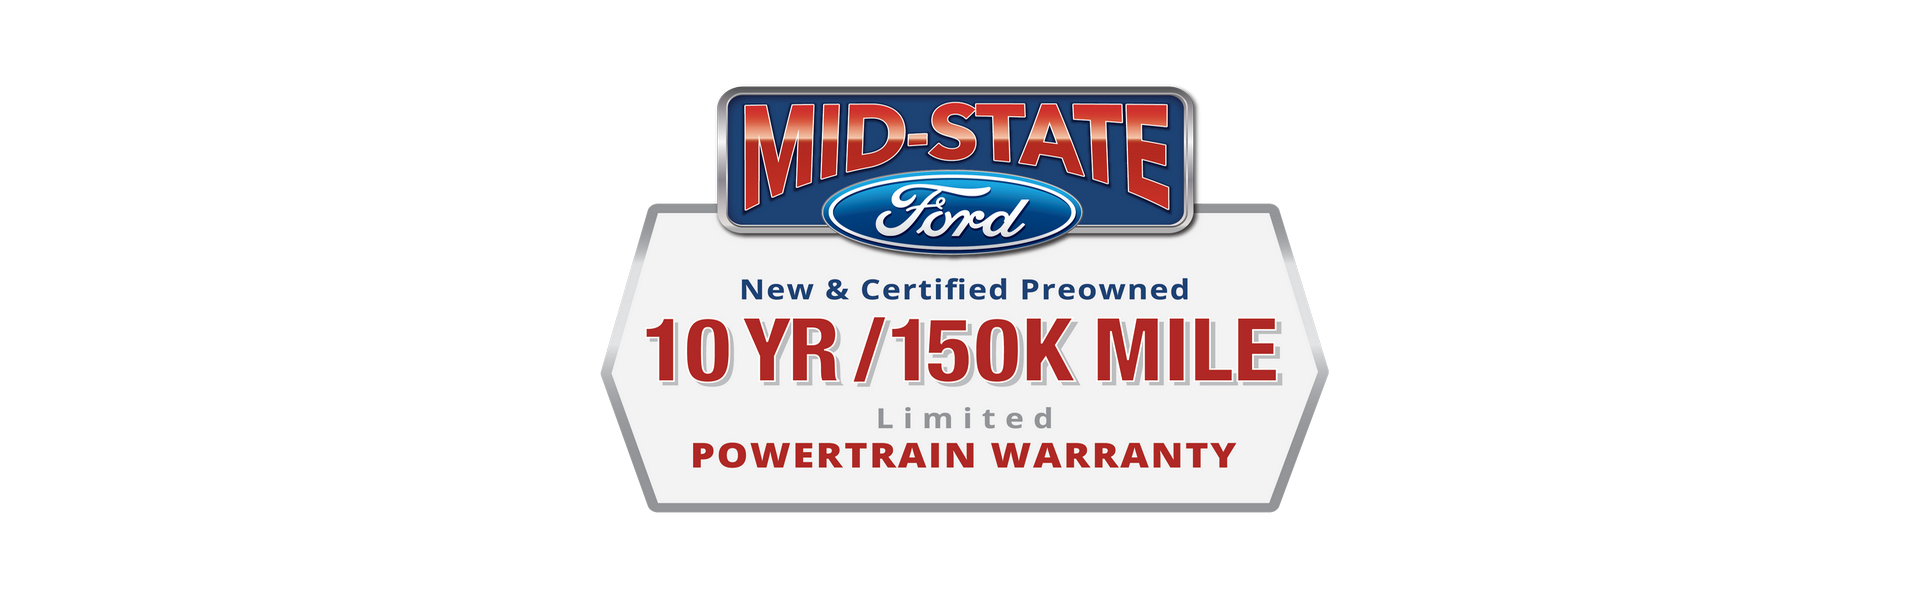 Mid State Ford, Limited Powertrain Warranty